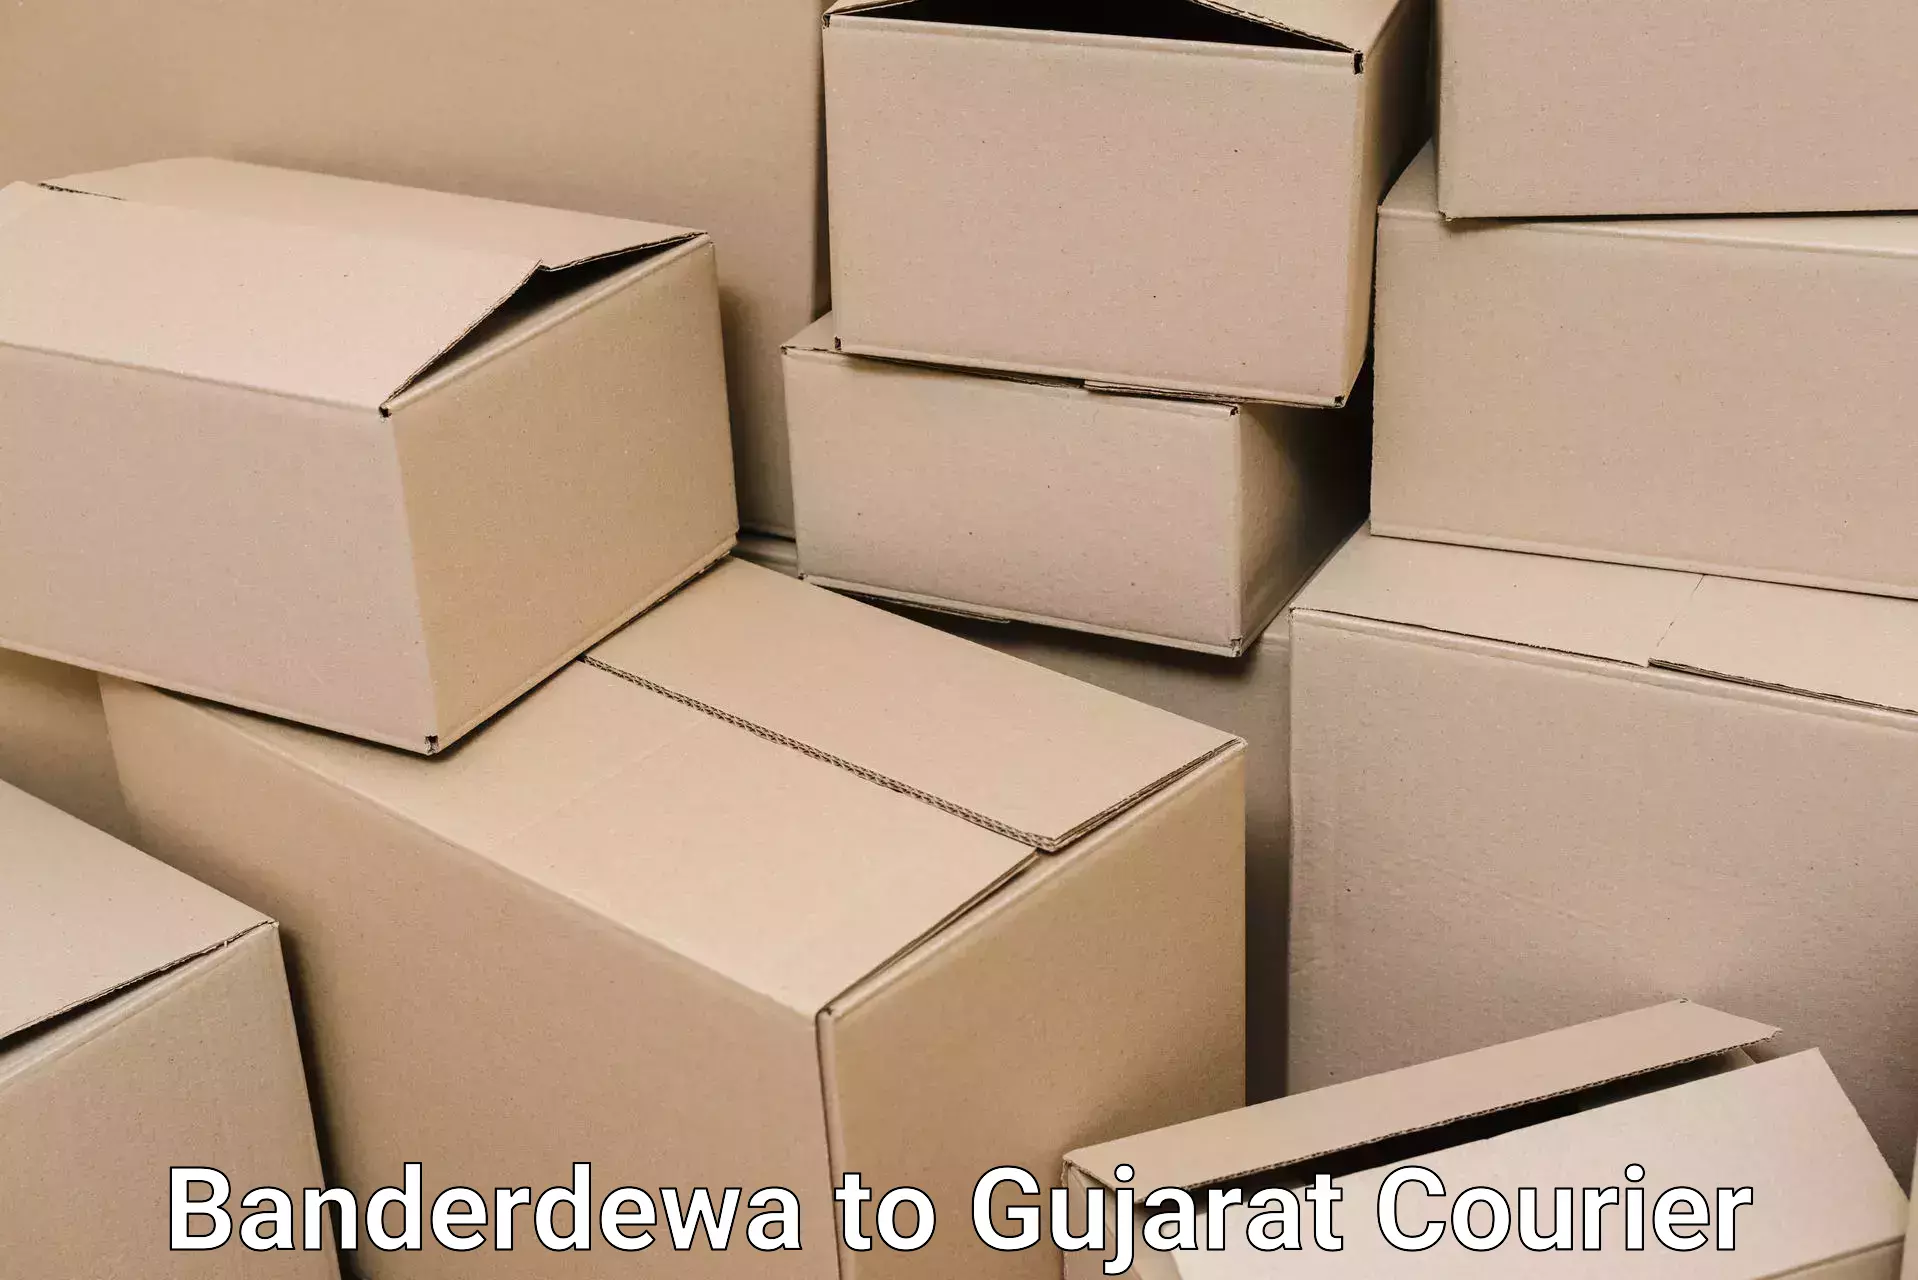 Quality relocation assistance Banderdewa to Jambusar